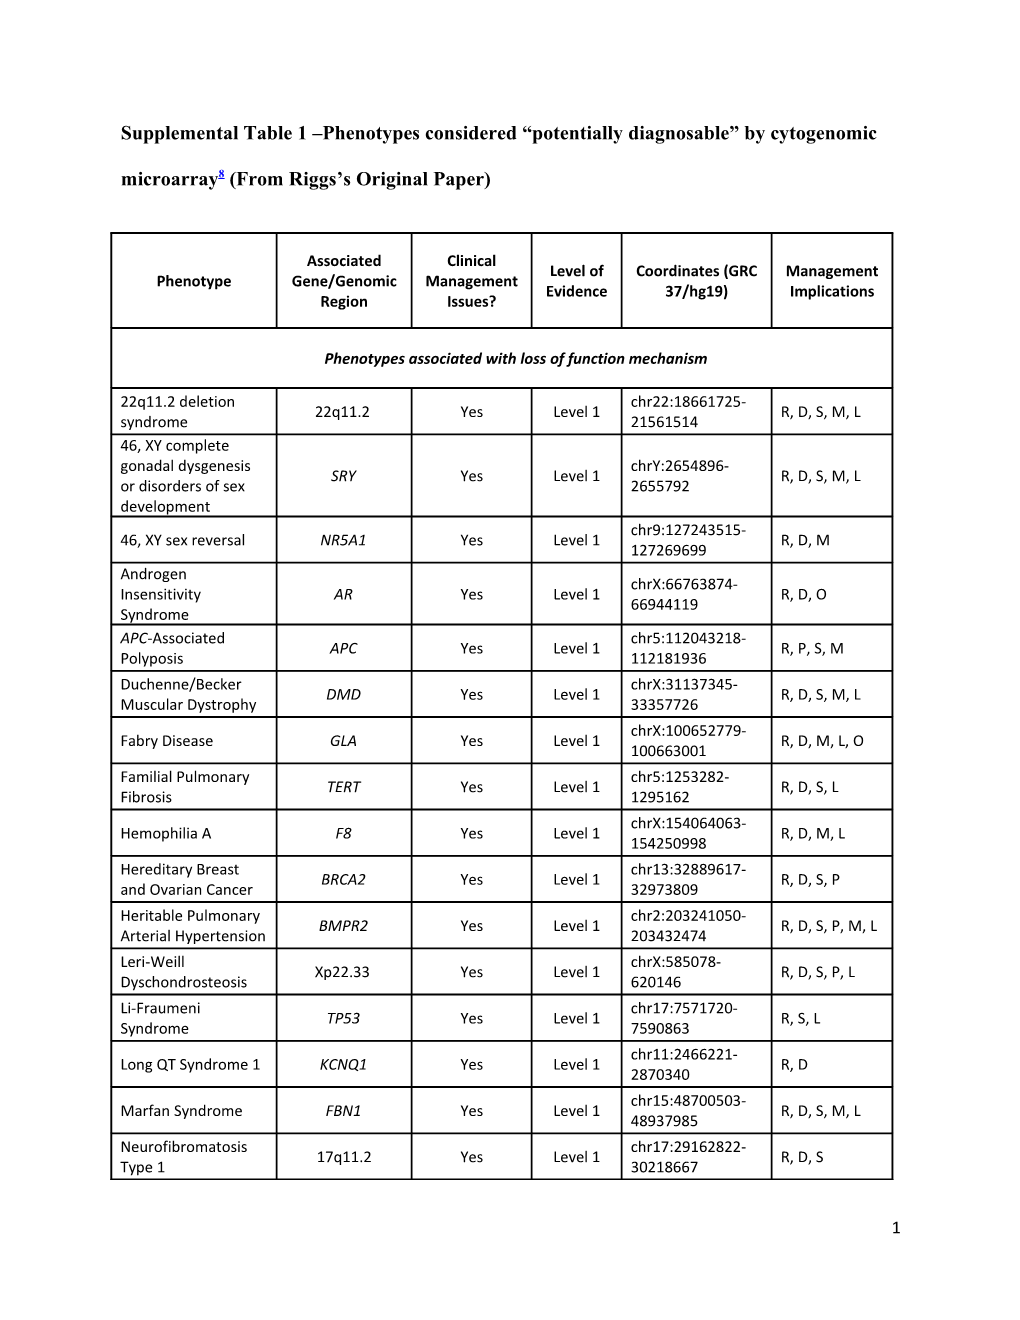 Supplemental Table 1 Phenotypes Considered Potentially Diagnosable by Cytogenomic Microarray